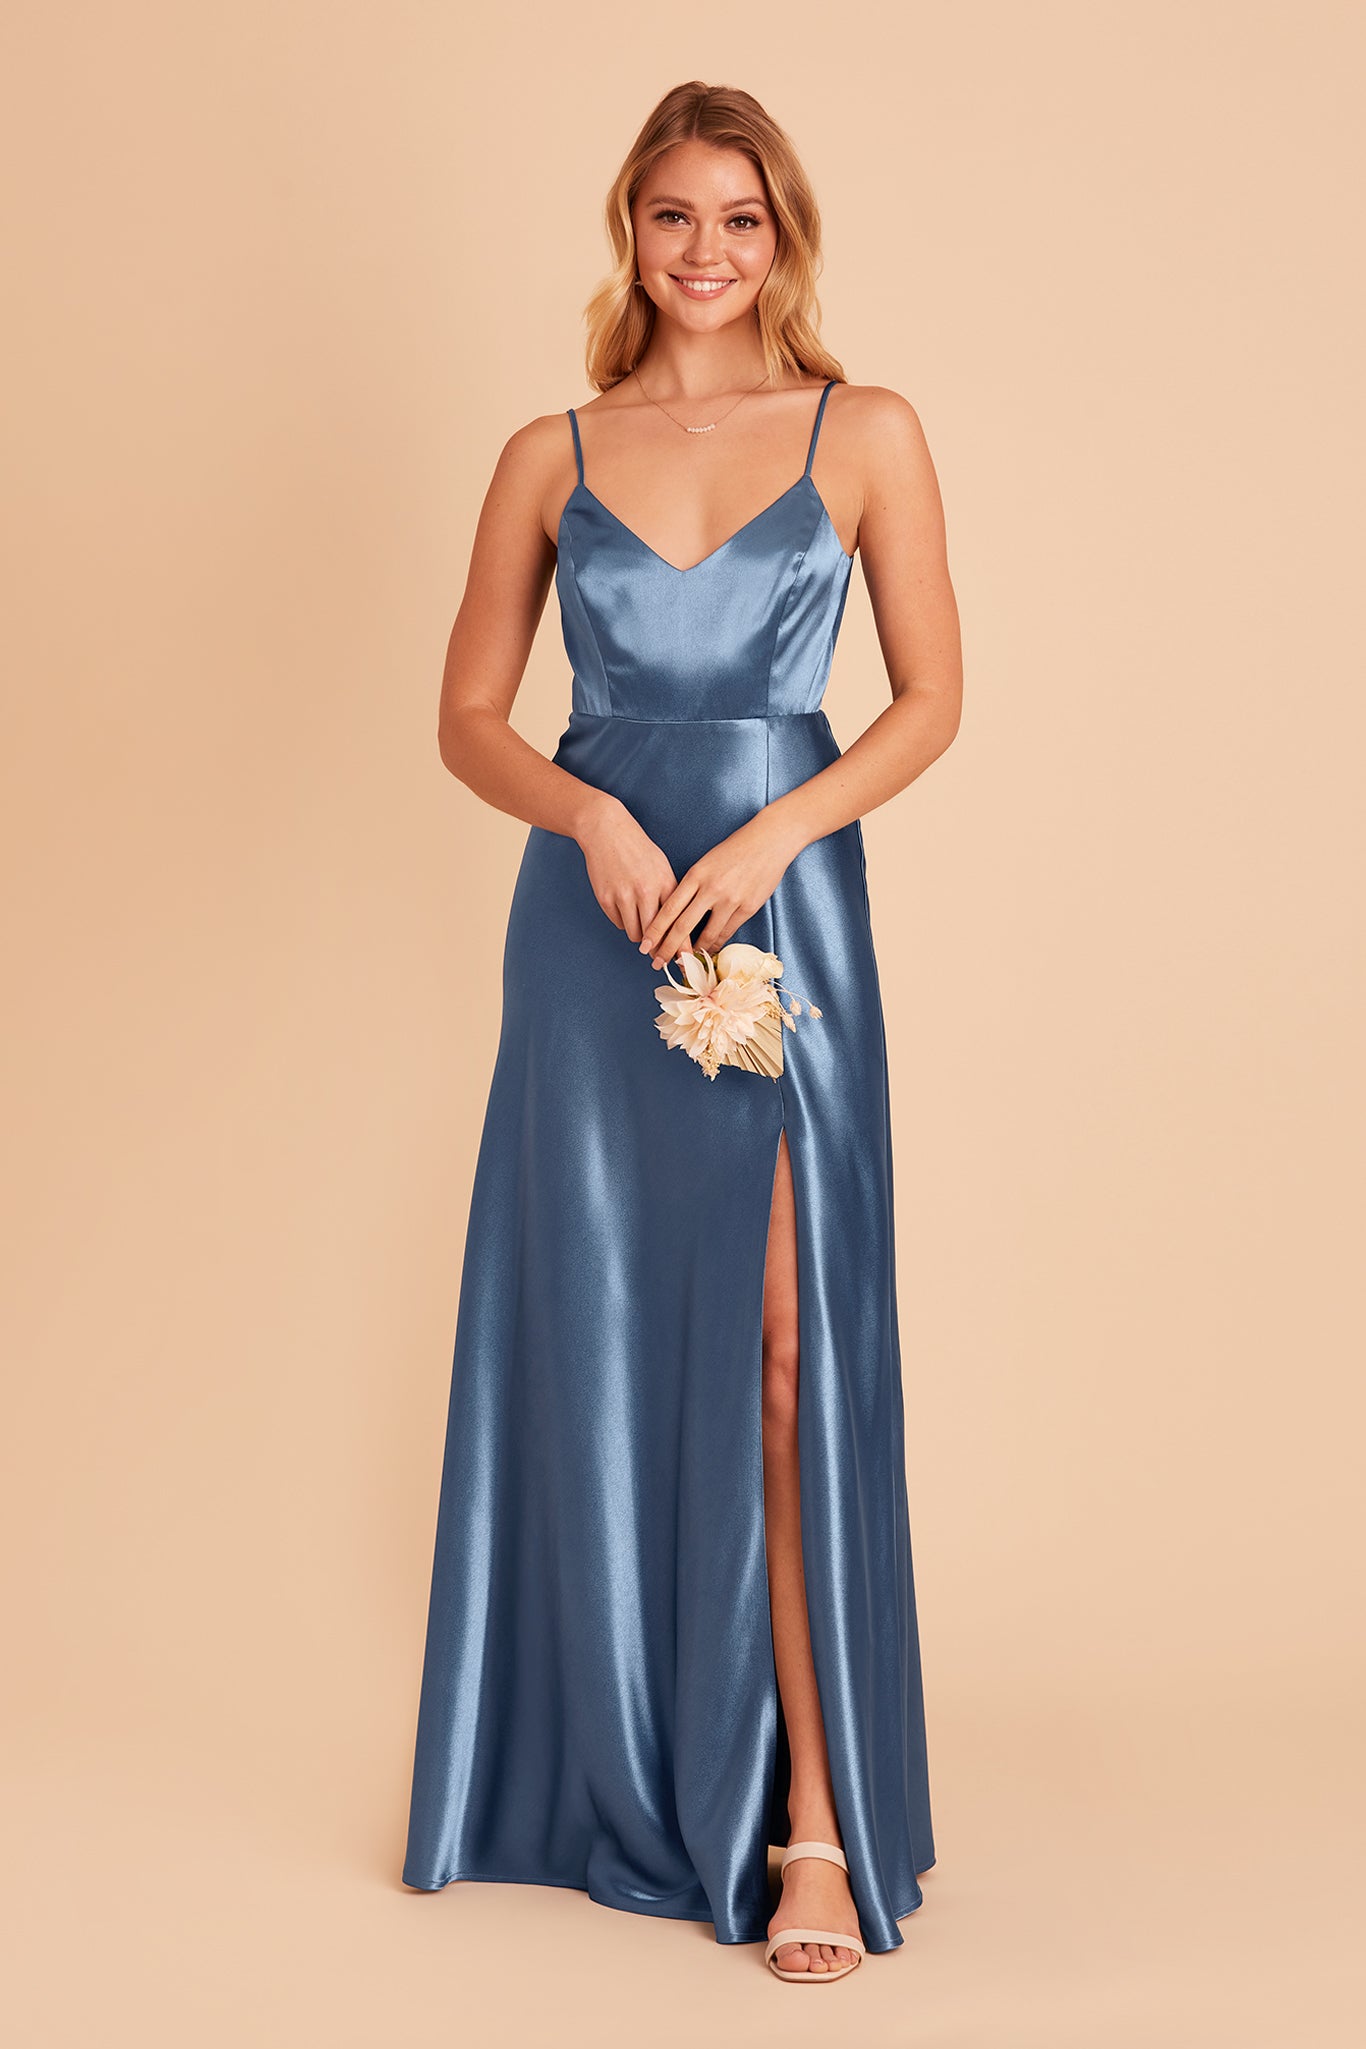 Jay bridesmaid dress with slit in twilight satin by Birdy Grey, front view